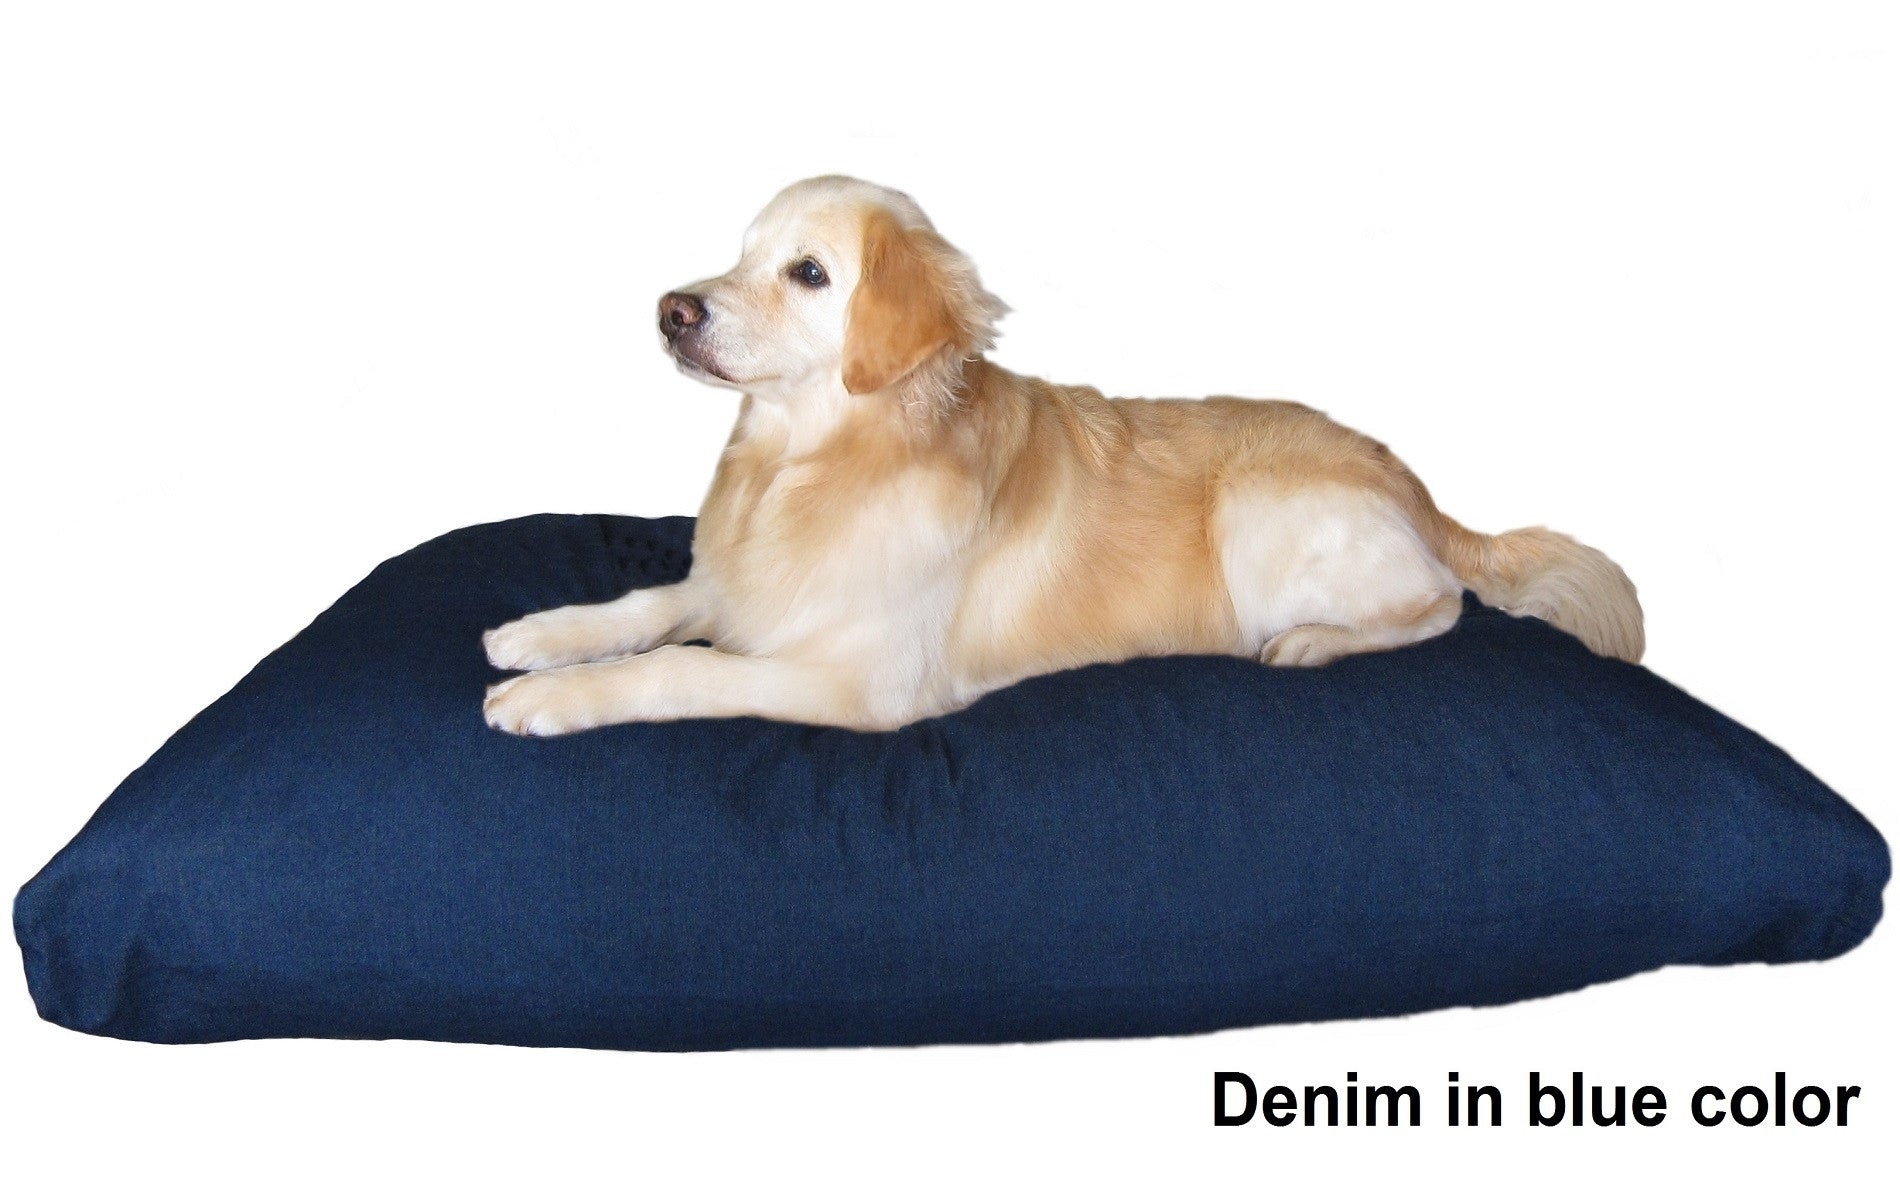 Dogbed4less Premium Density High Grade Shredded Memory Foam Filling Inserts for Stuffing, Pillows, Bean Bag, Chair, Sofa, Pet Dog Bed, Crafts and More (10 lbs)